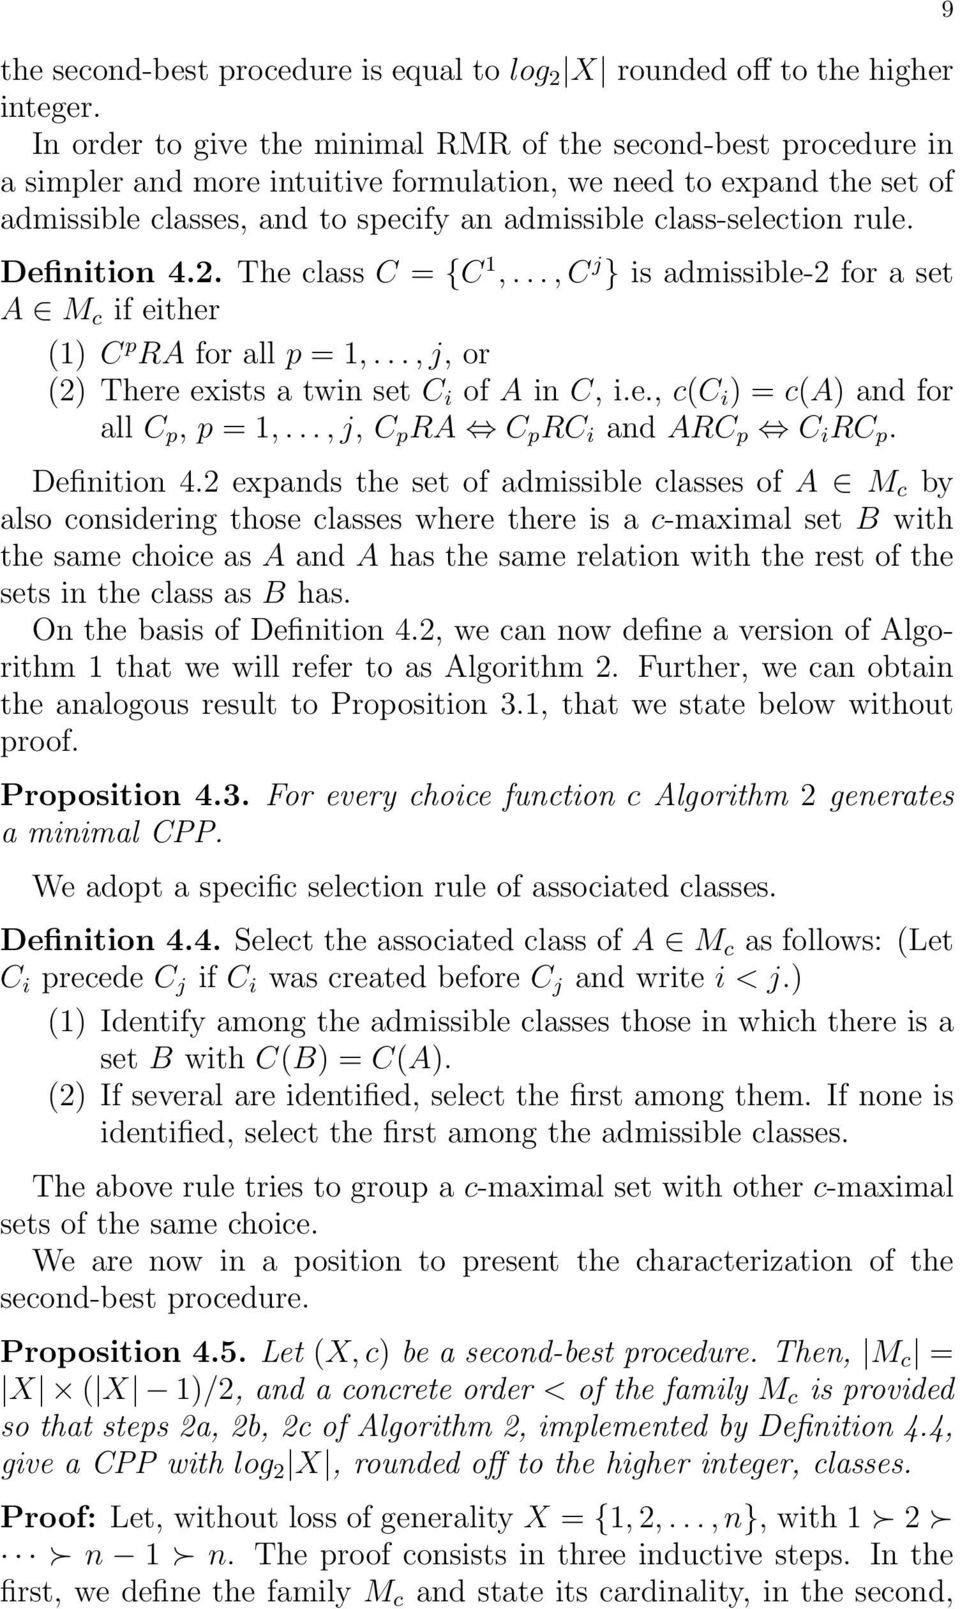 class-selection rule. Definition 4.2. The class C = {C 1,..., C j } is admissible-2 for a set A M c if either (1) C p RA for all p = 1,..., j, or (2) There exists a twin set C i of A in C, i.e., c(c i ) = c(a) and for all C p, p = 1,.